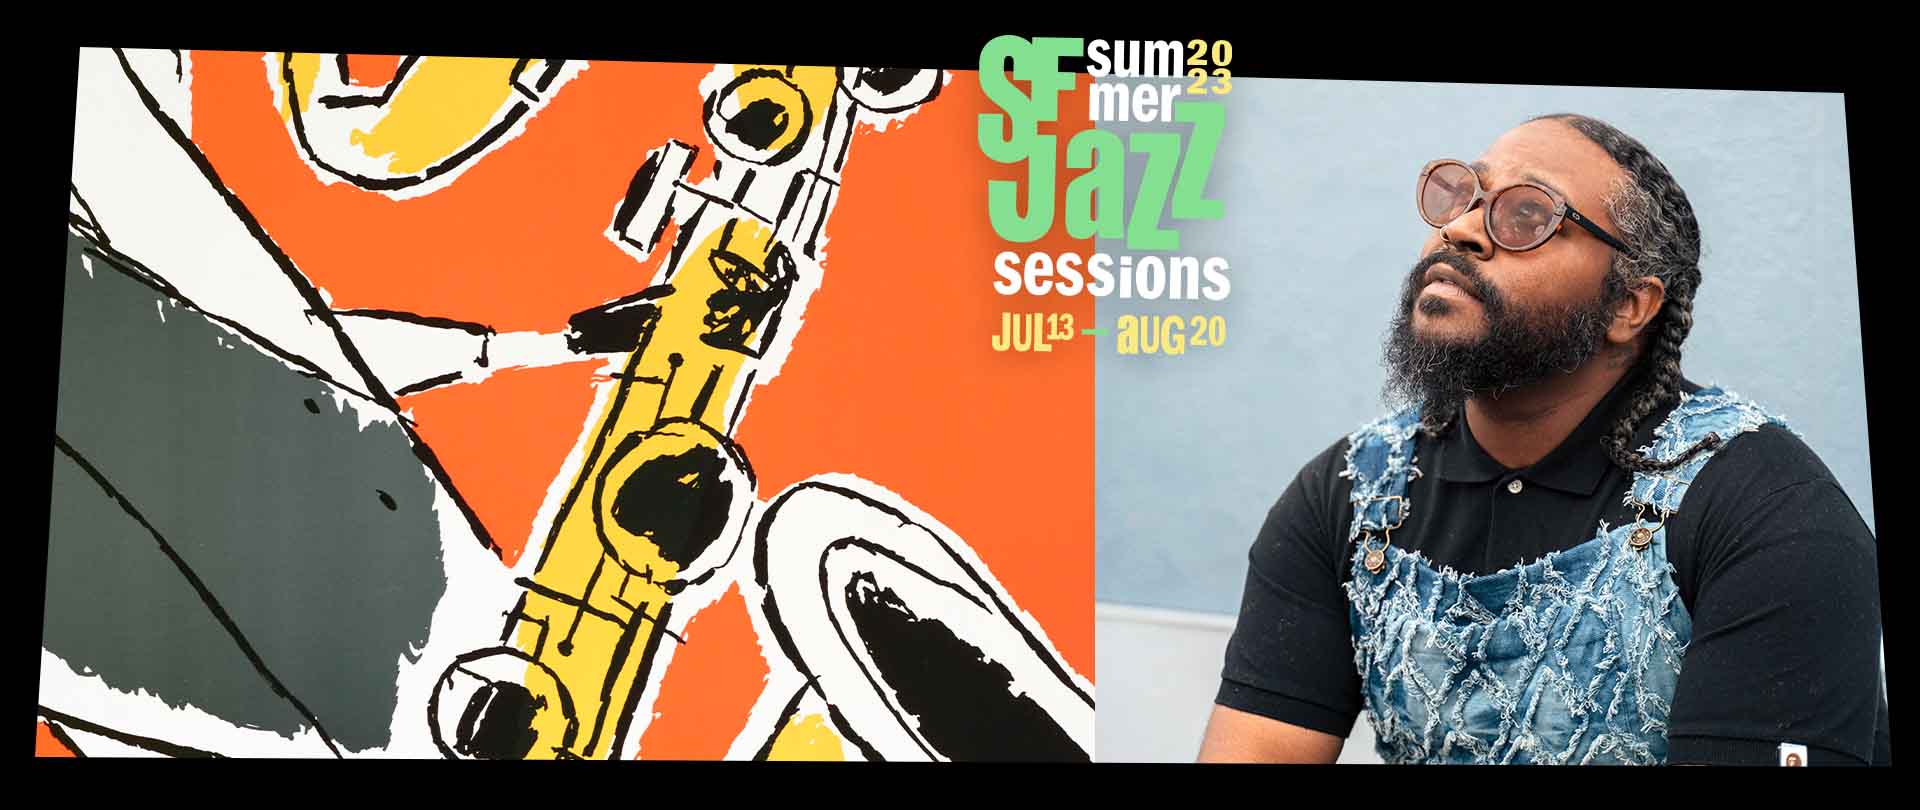 Pher With the 2023 summer sessions logo